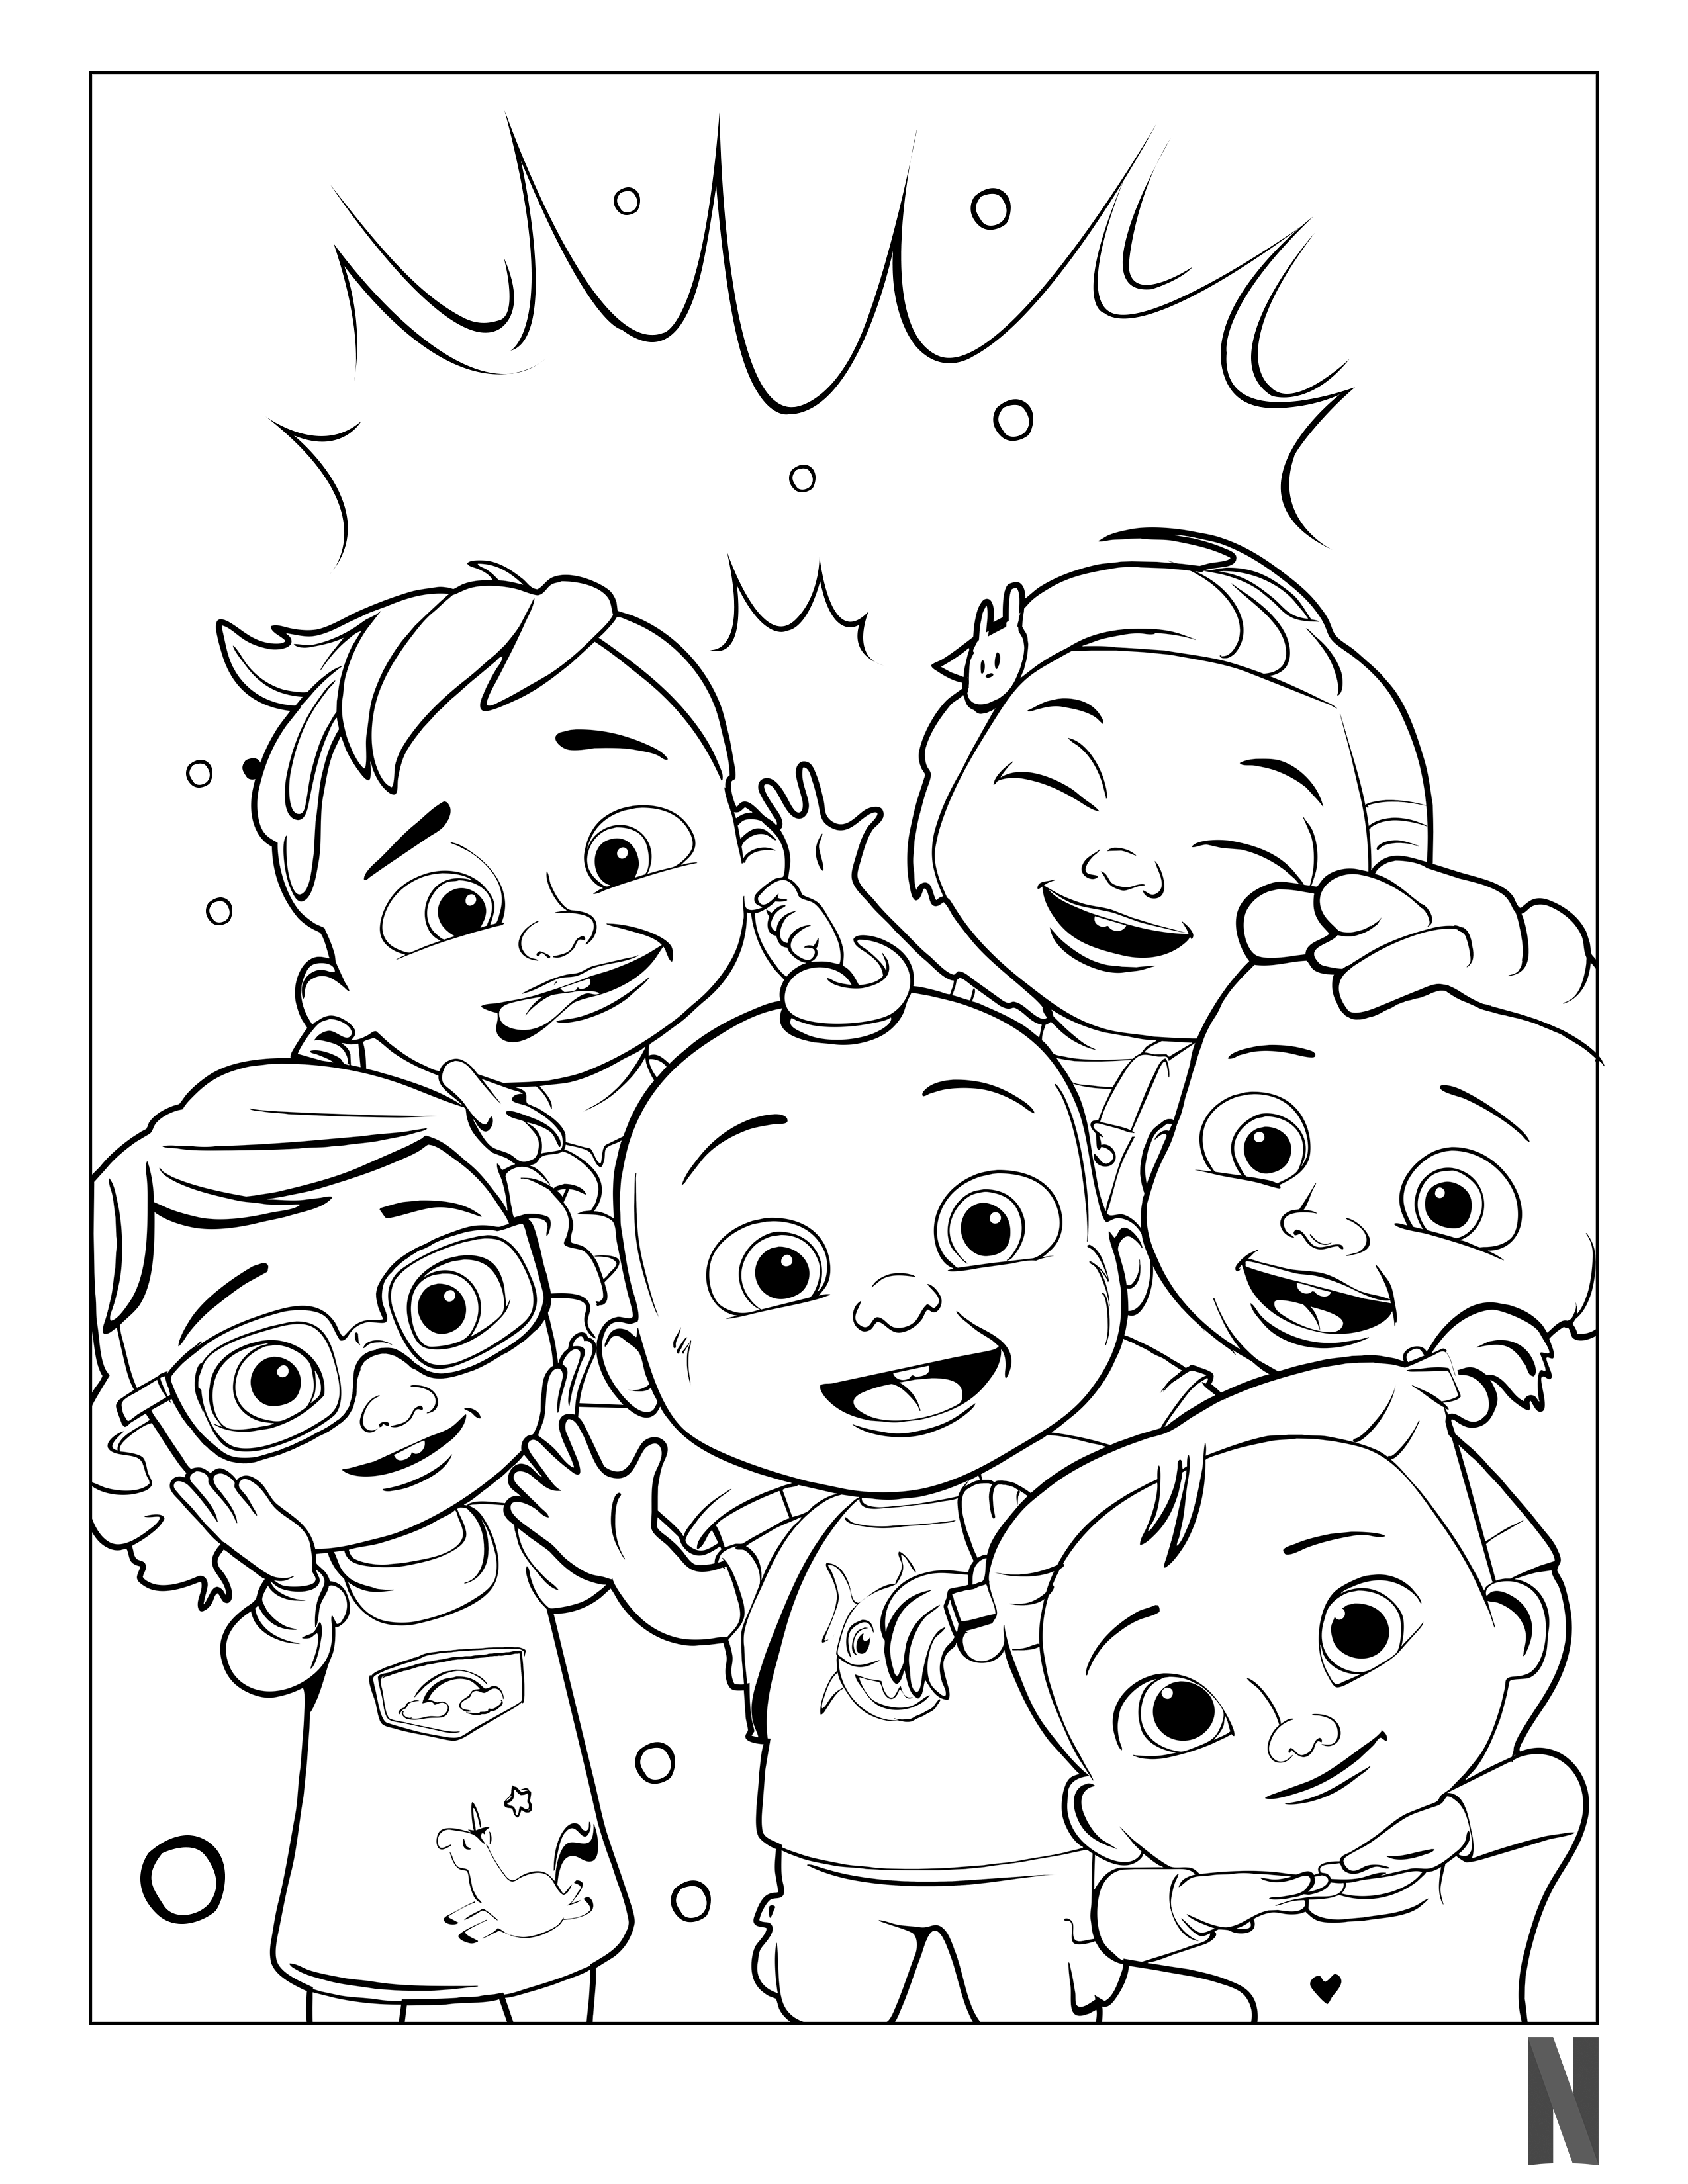 Coelon coloring page birthday coloring pages cartoon coloring pages coloring pages inspirational